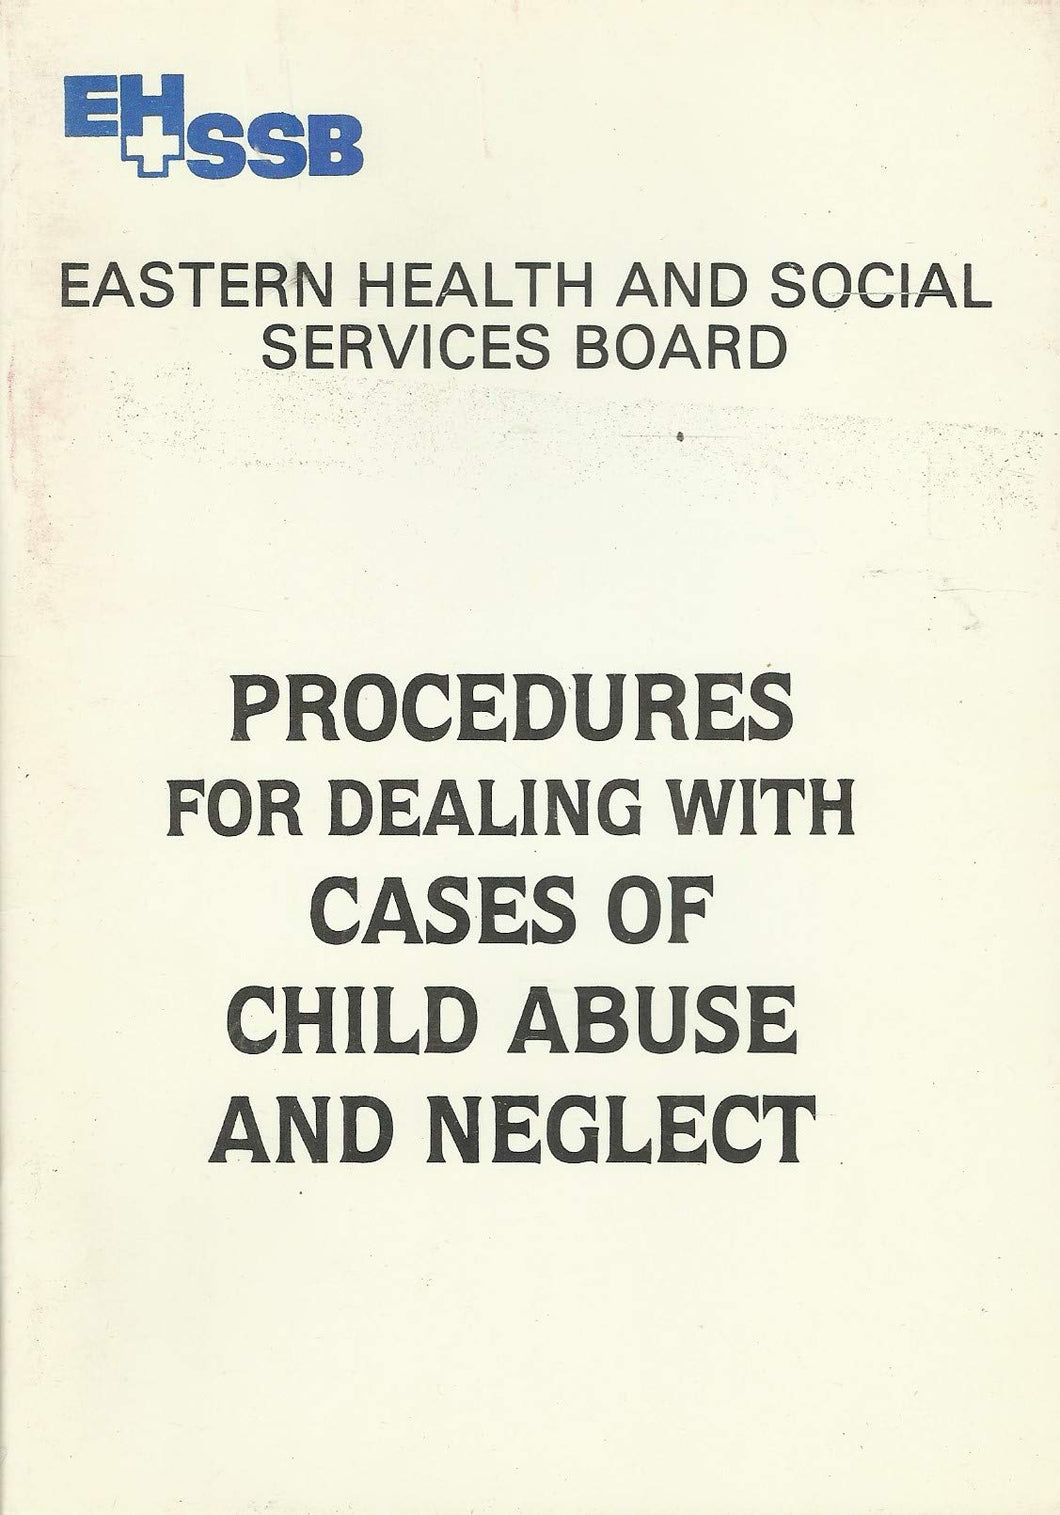 Procedures for Dealing with Cases of Child Abuse and Neglect - EHSSB - Eastern Health and Social Services Board (Northern Ireland)